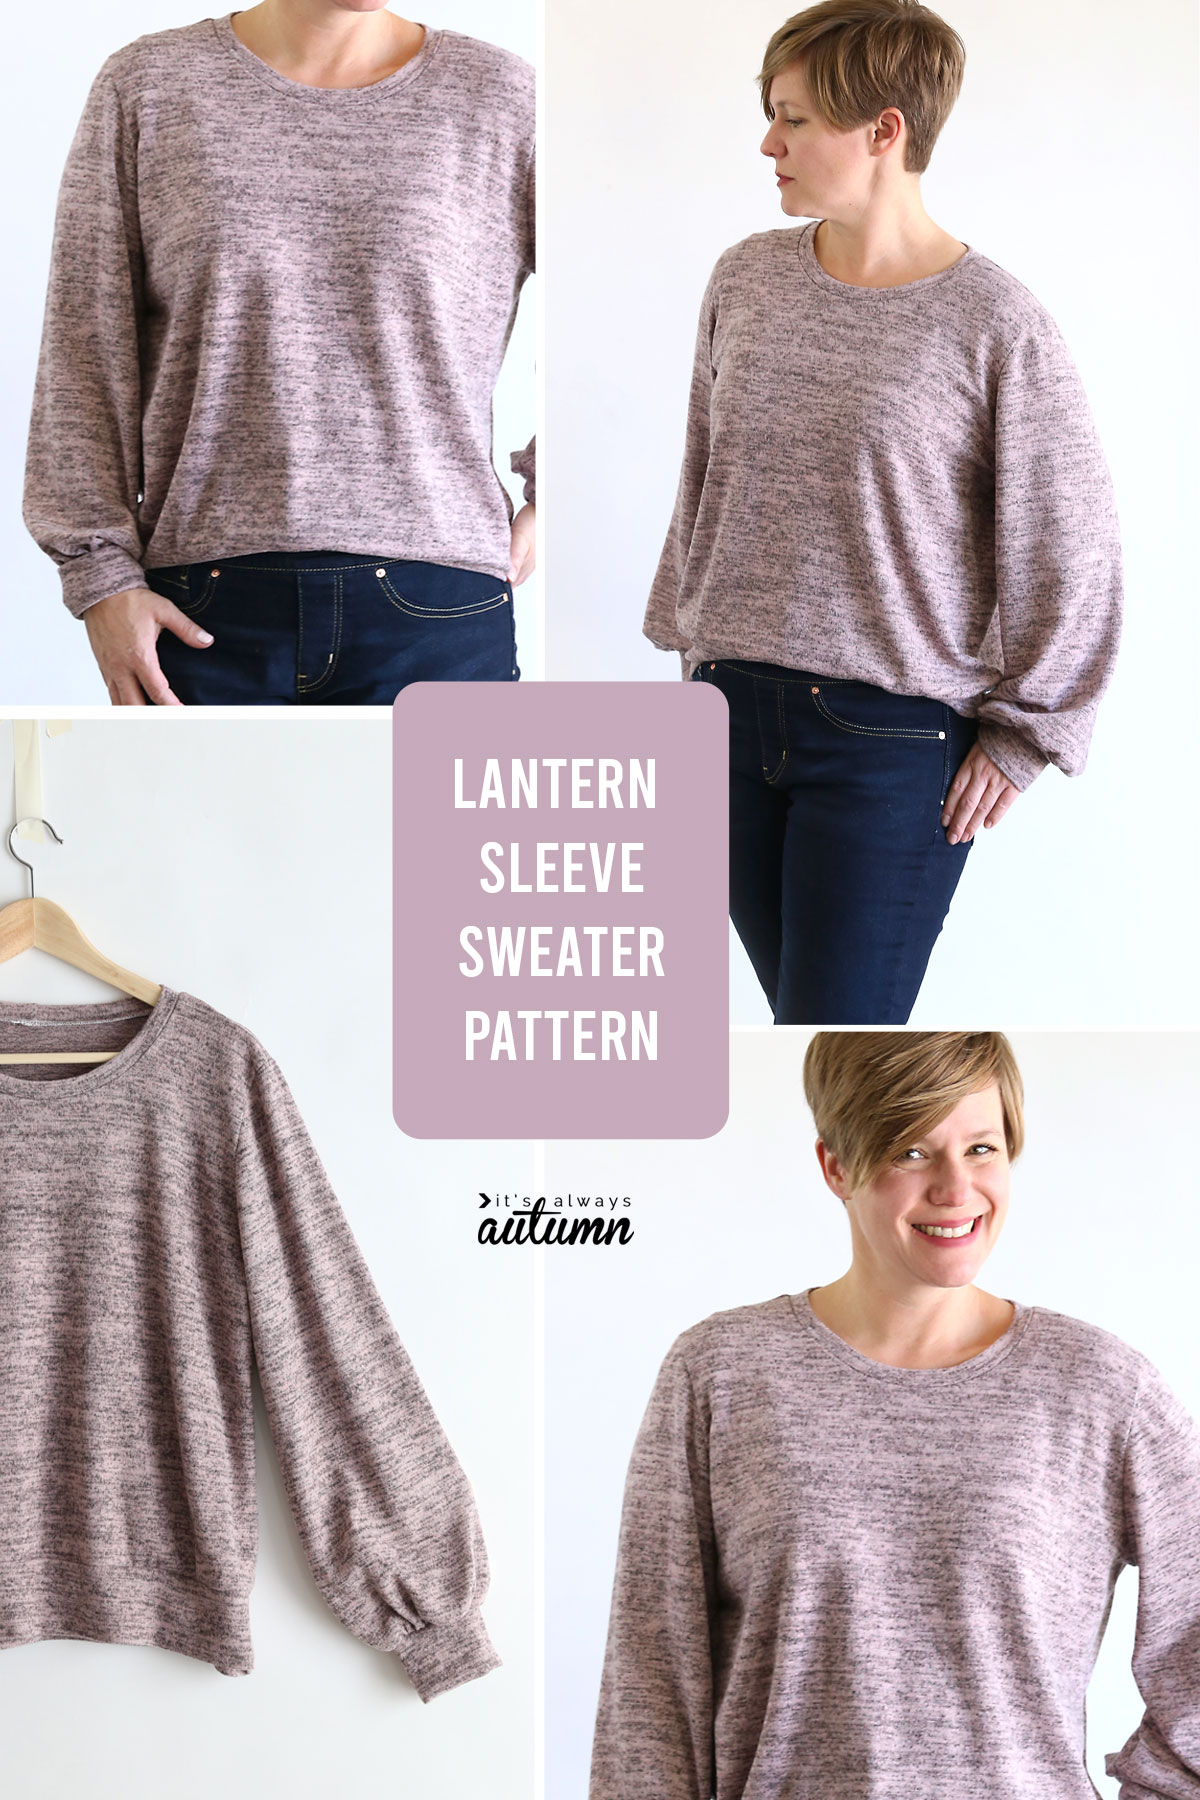 How to Sew a Lantern Sleeve - Sleeve Hack - Melly Sews